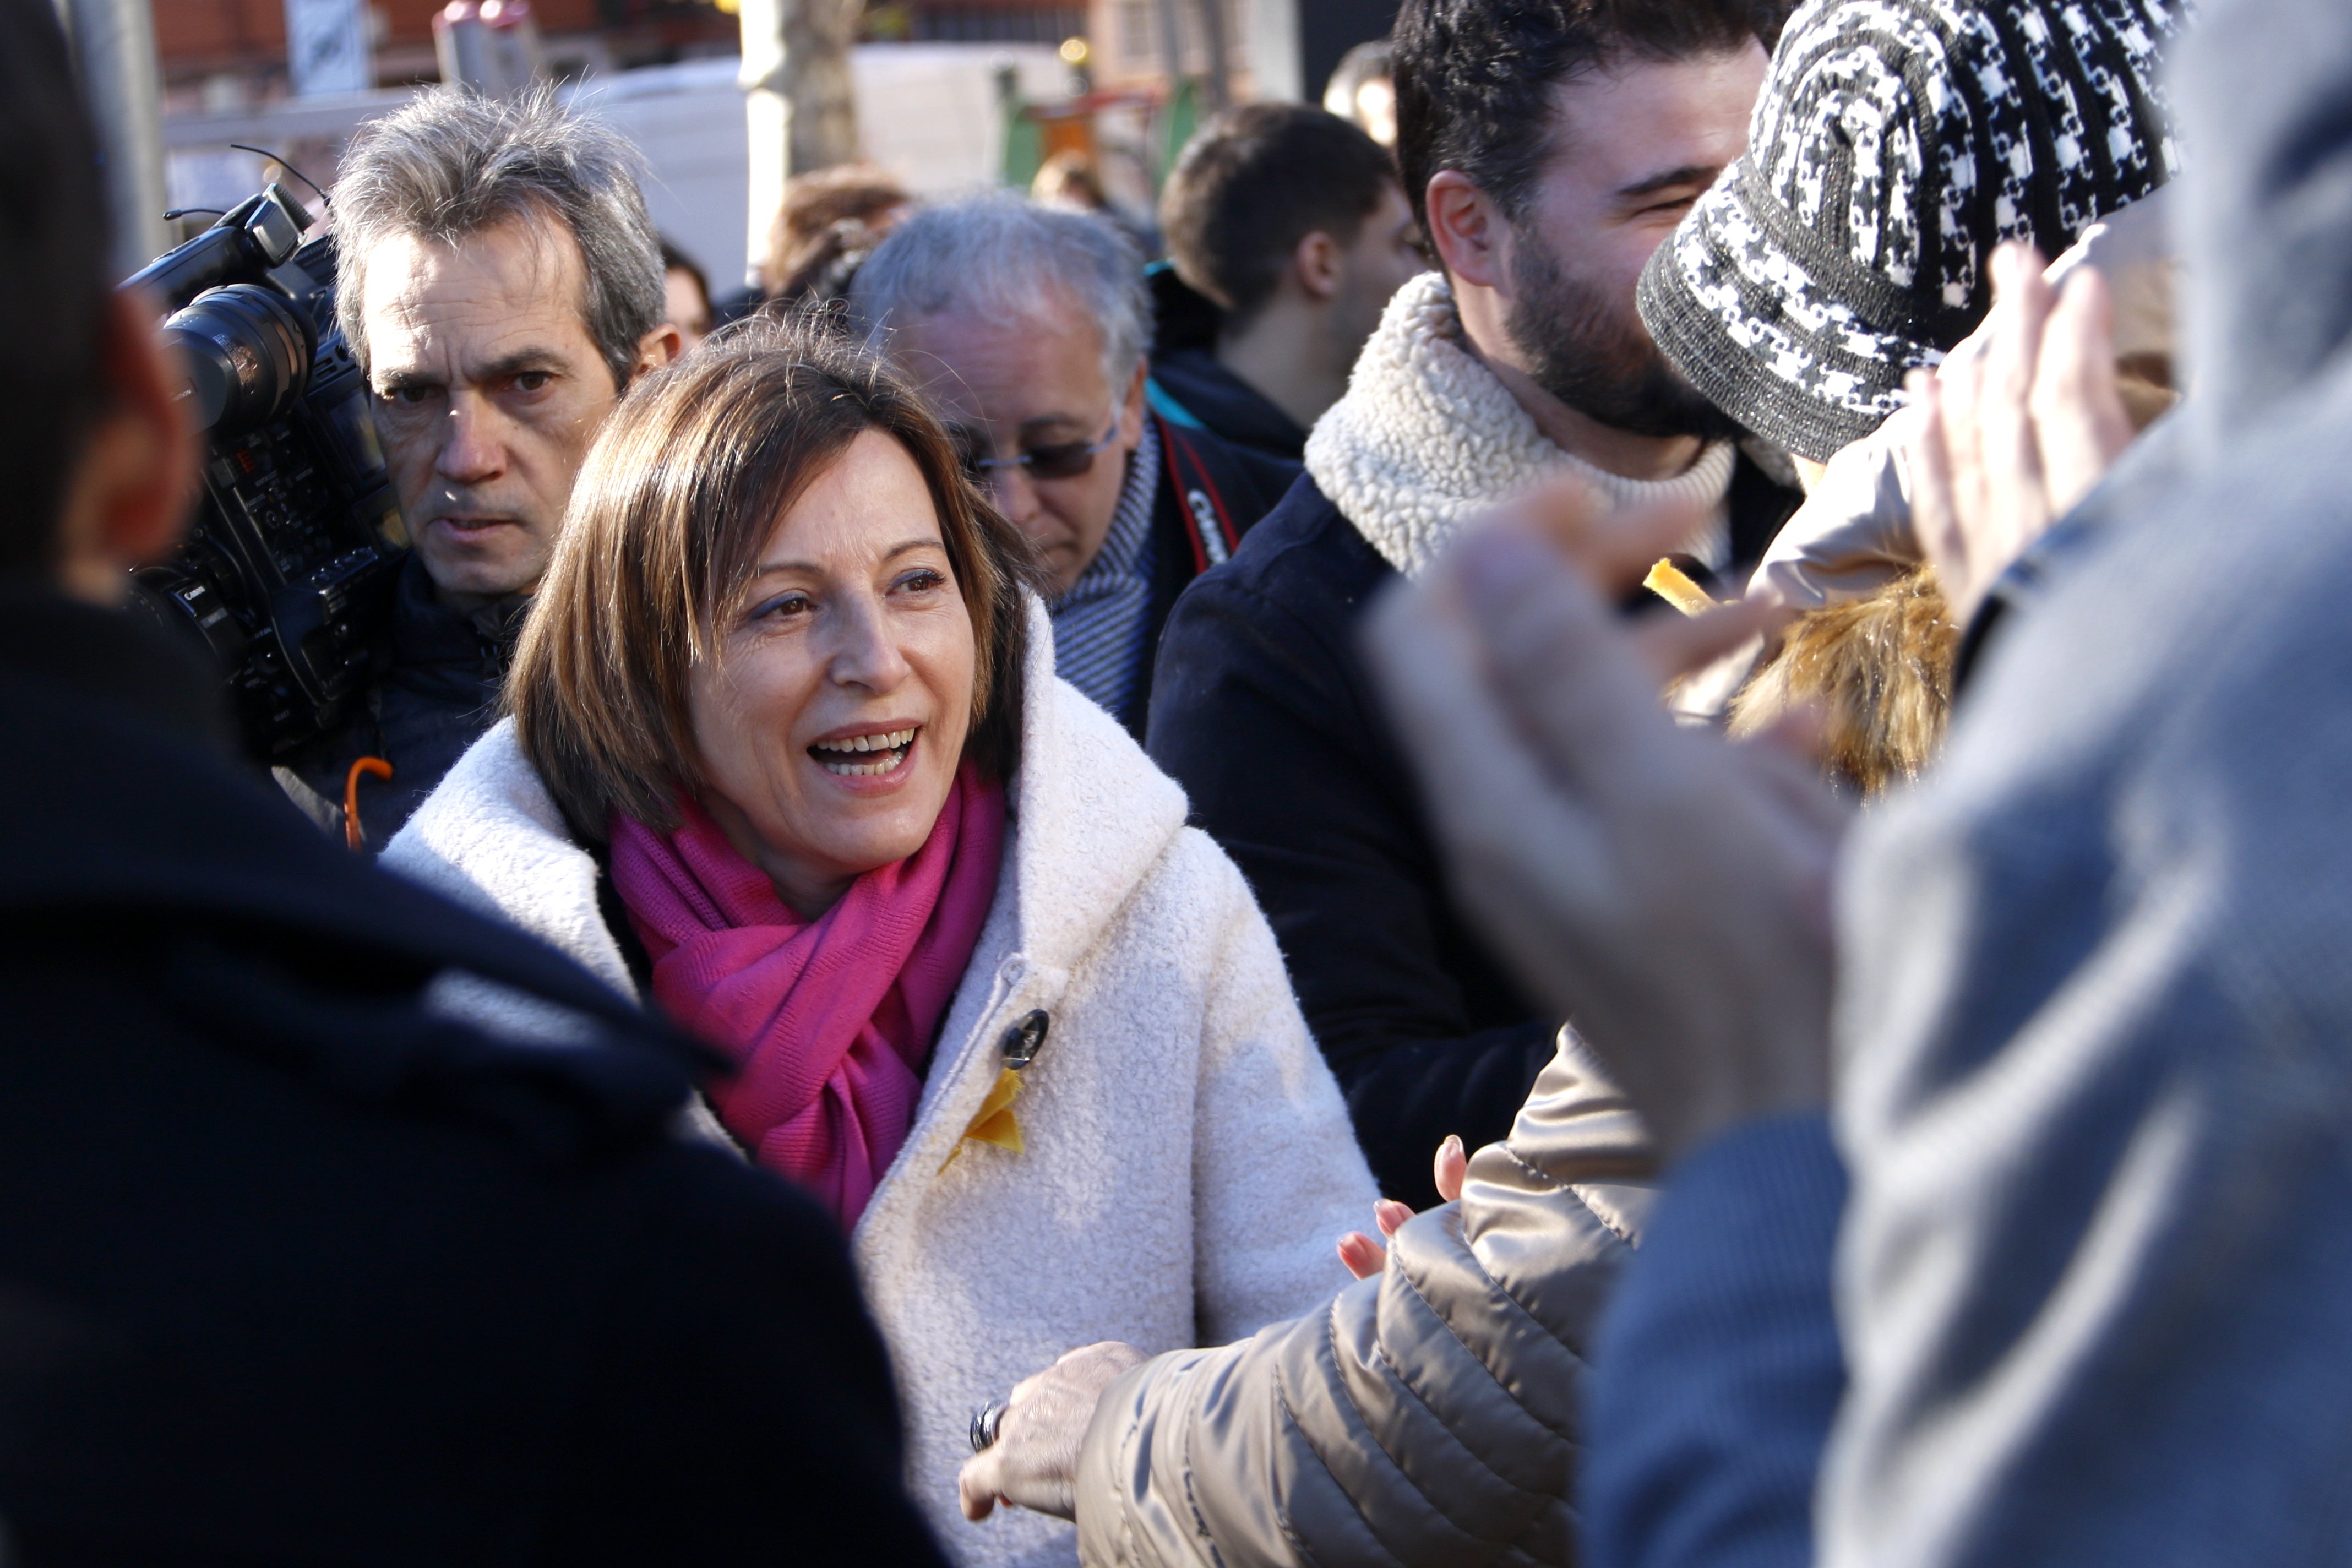 500 politicians from 25 countries sign manifesto in support of Carme Forcadell